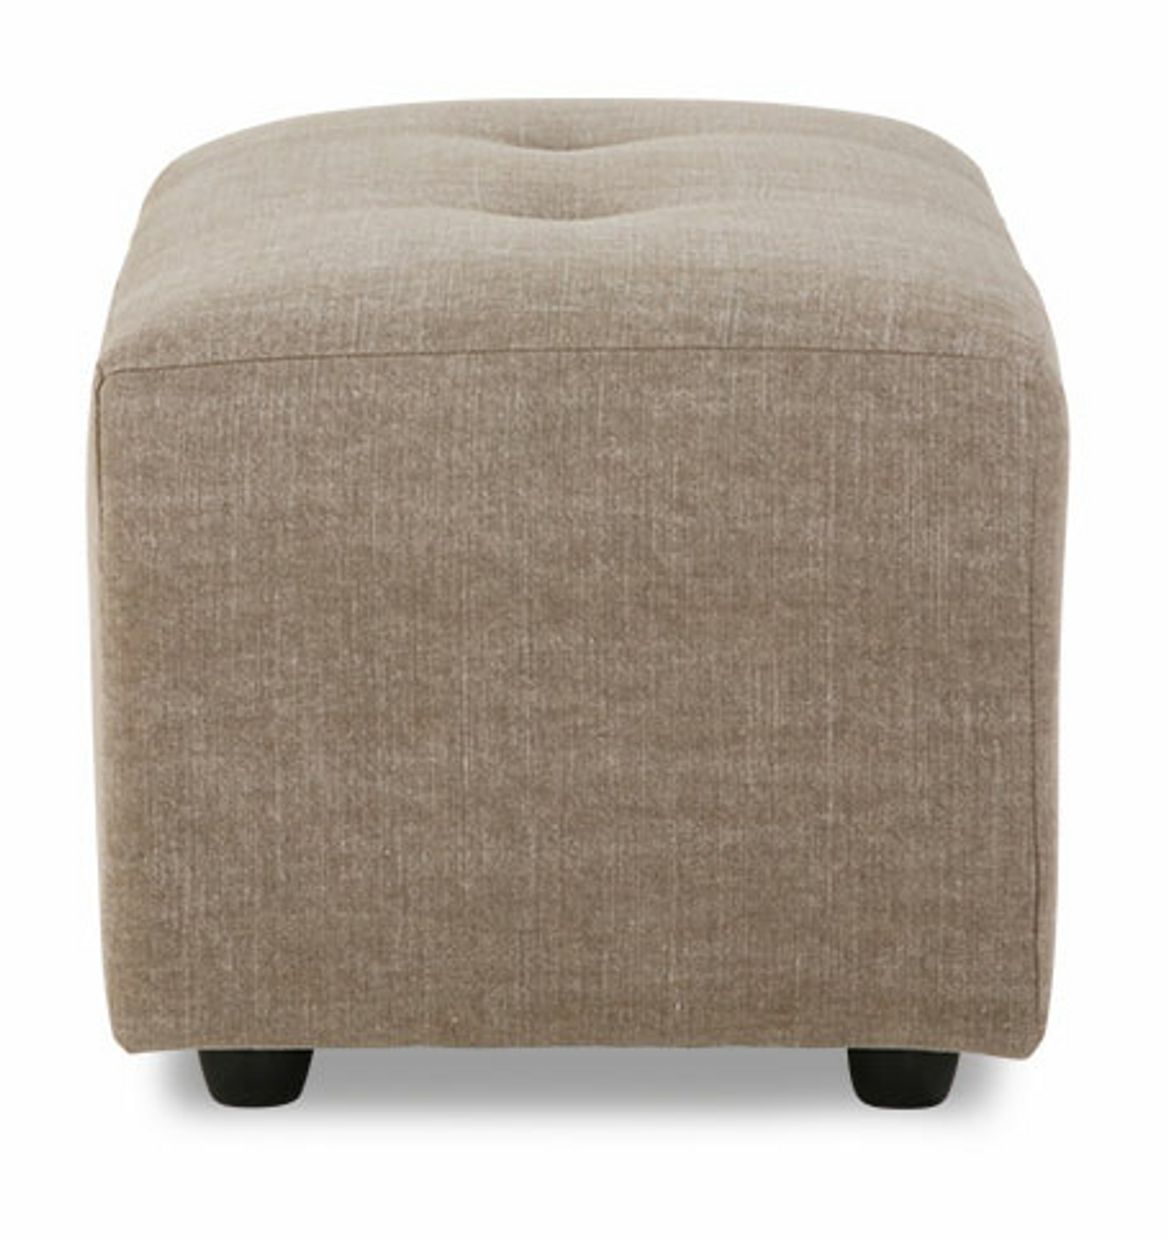 Vint couch: element hocker small, linen blend, taupe